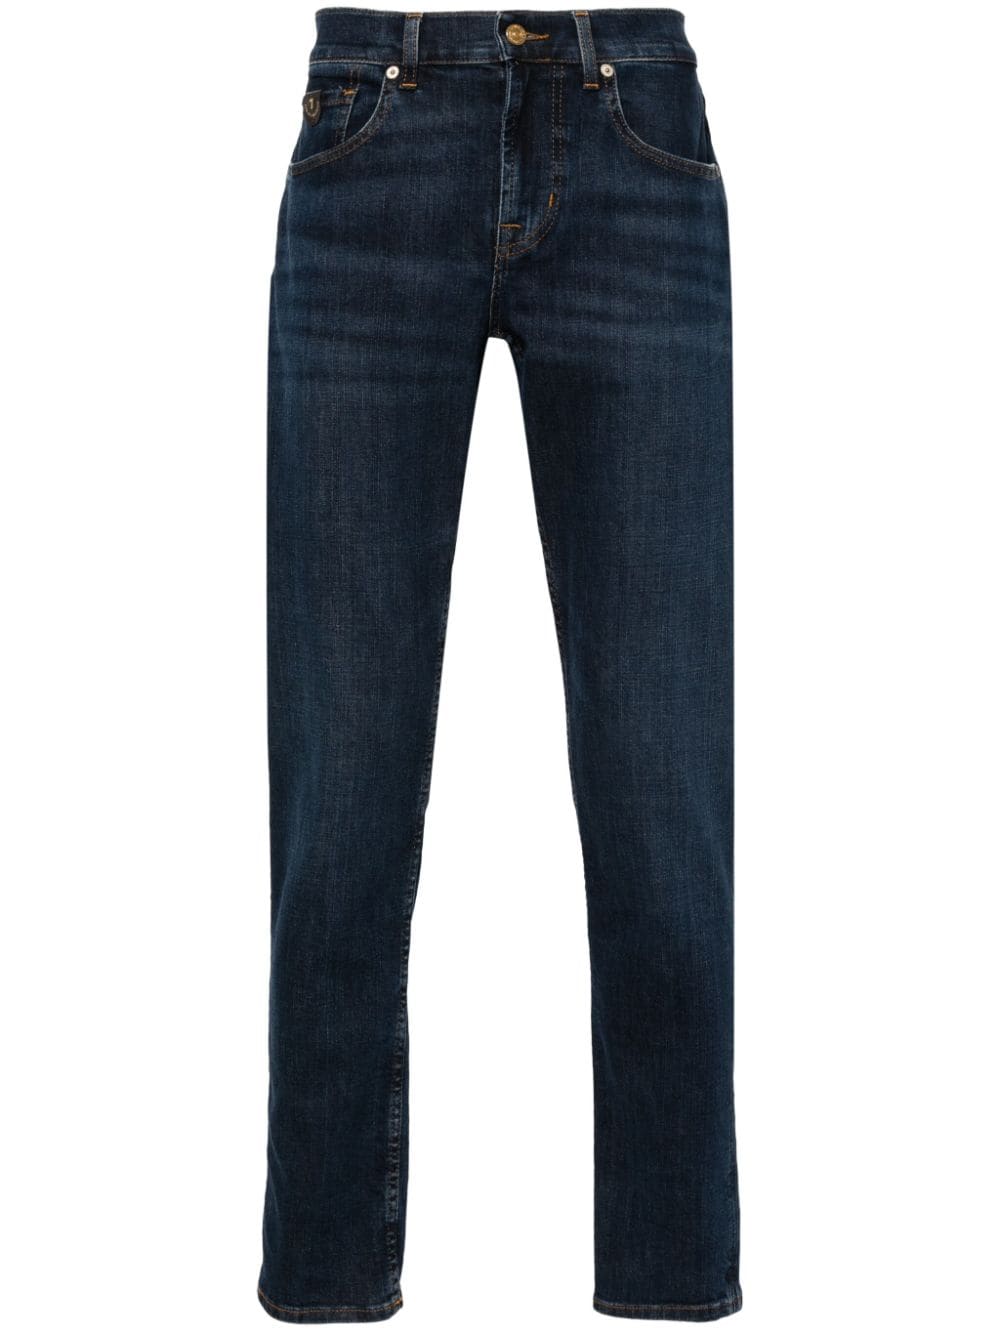 7 For All Mankind Slimmy Tapered mid-rise jeans - Blue von 7 For All Mankind